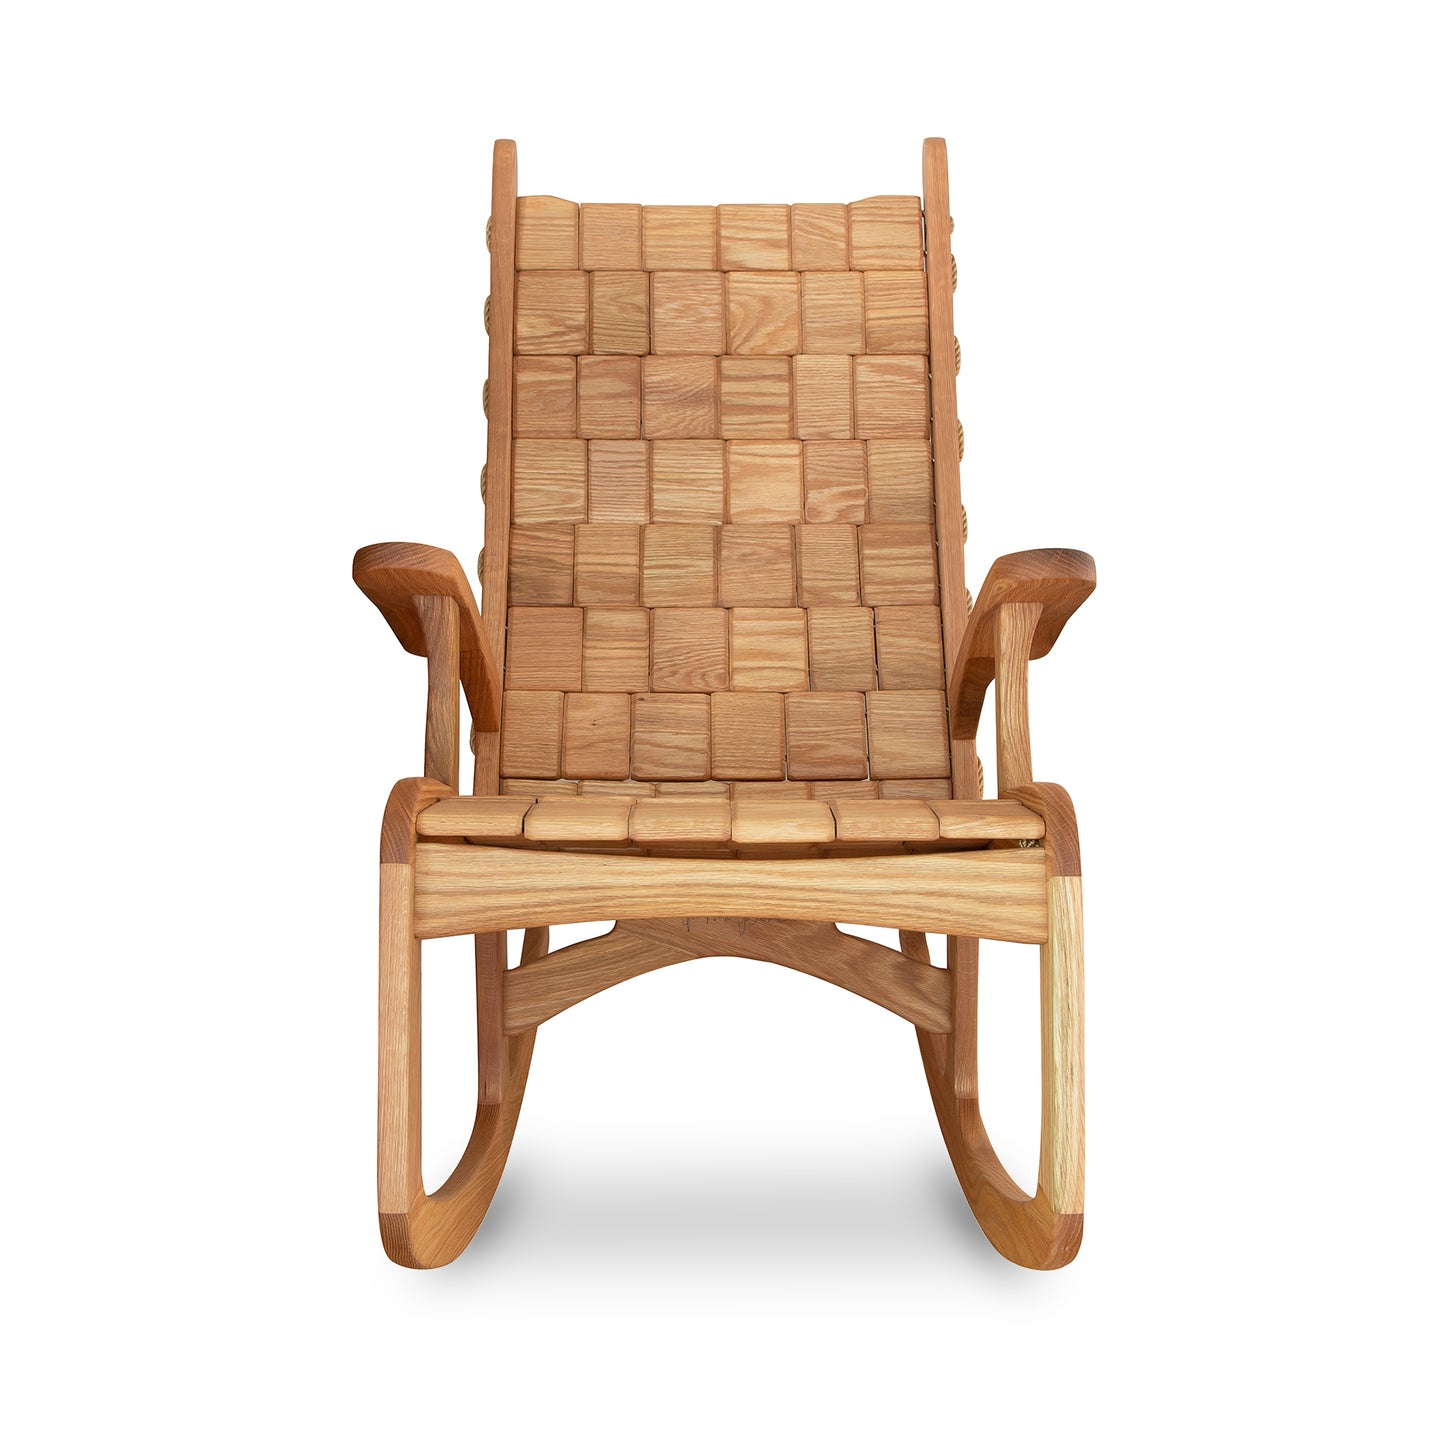 A Quilted Vermont Oak Rocking Chair by Vermont Folk Rocker with a woven seat and backrest, featuring curved armrests and a sturdy frame, isolated on a white background.